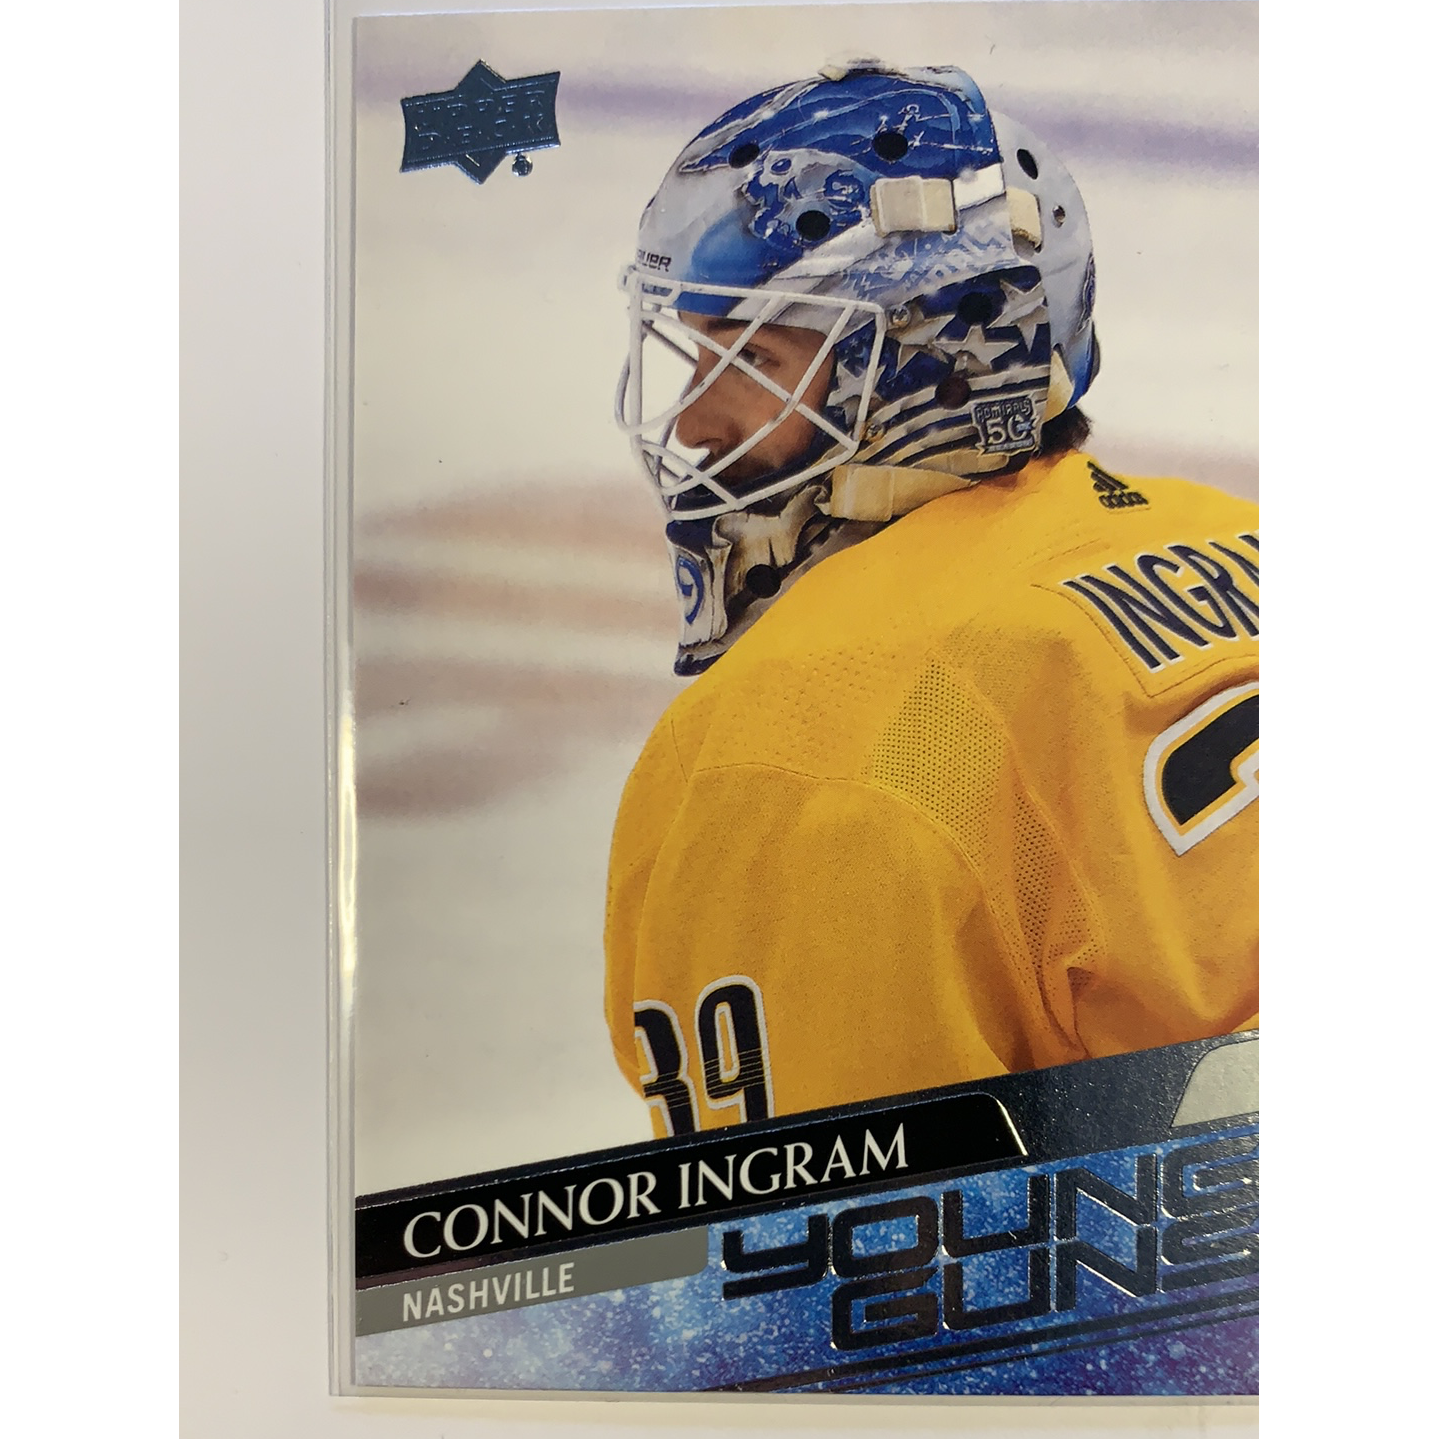  2020-21 Upper Deck Series 1 Connor Ingram Young Guns  Local Legends Cards & Collectibles